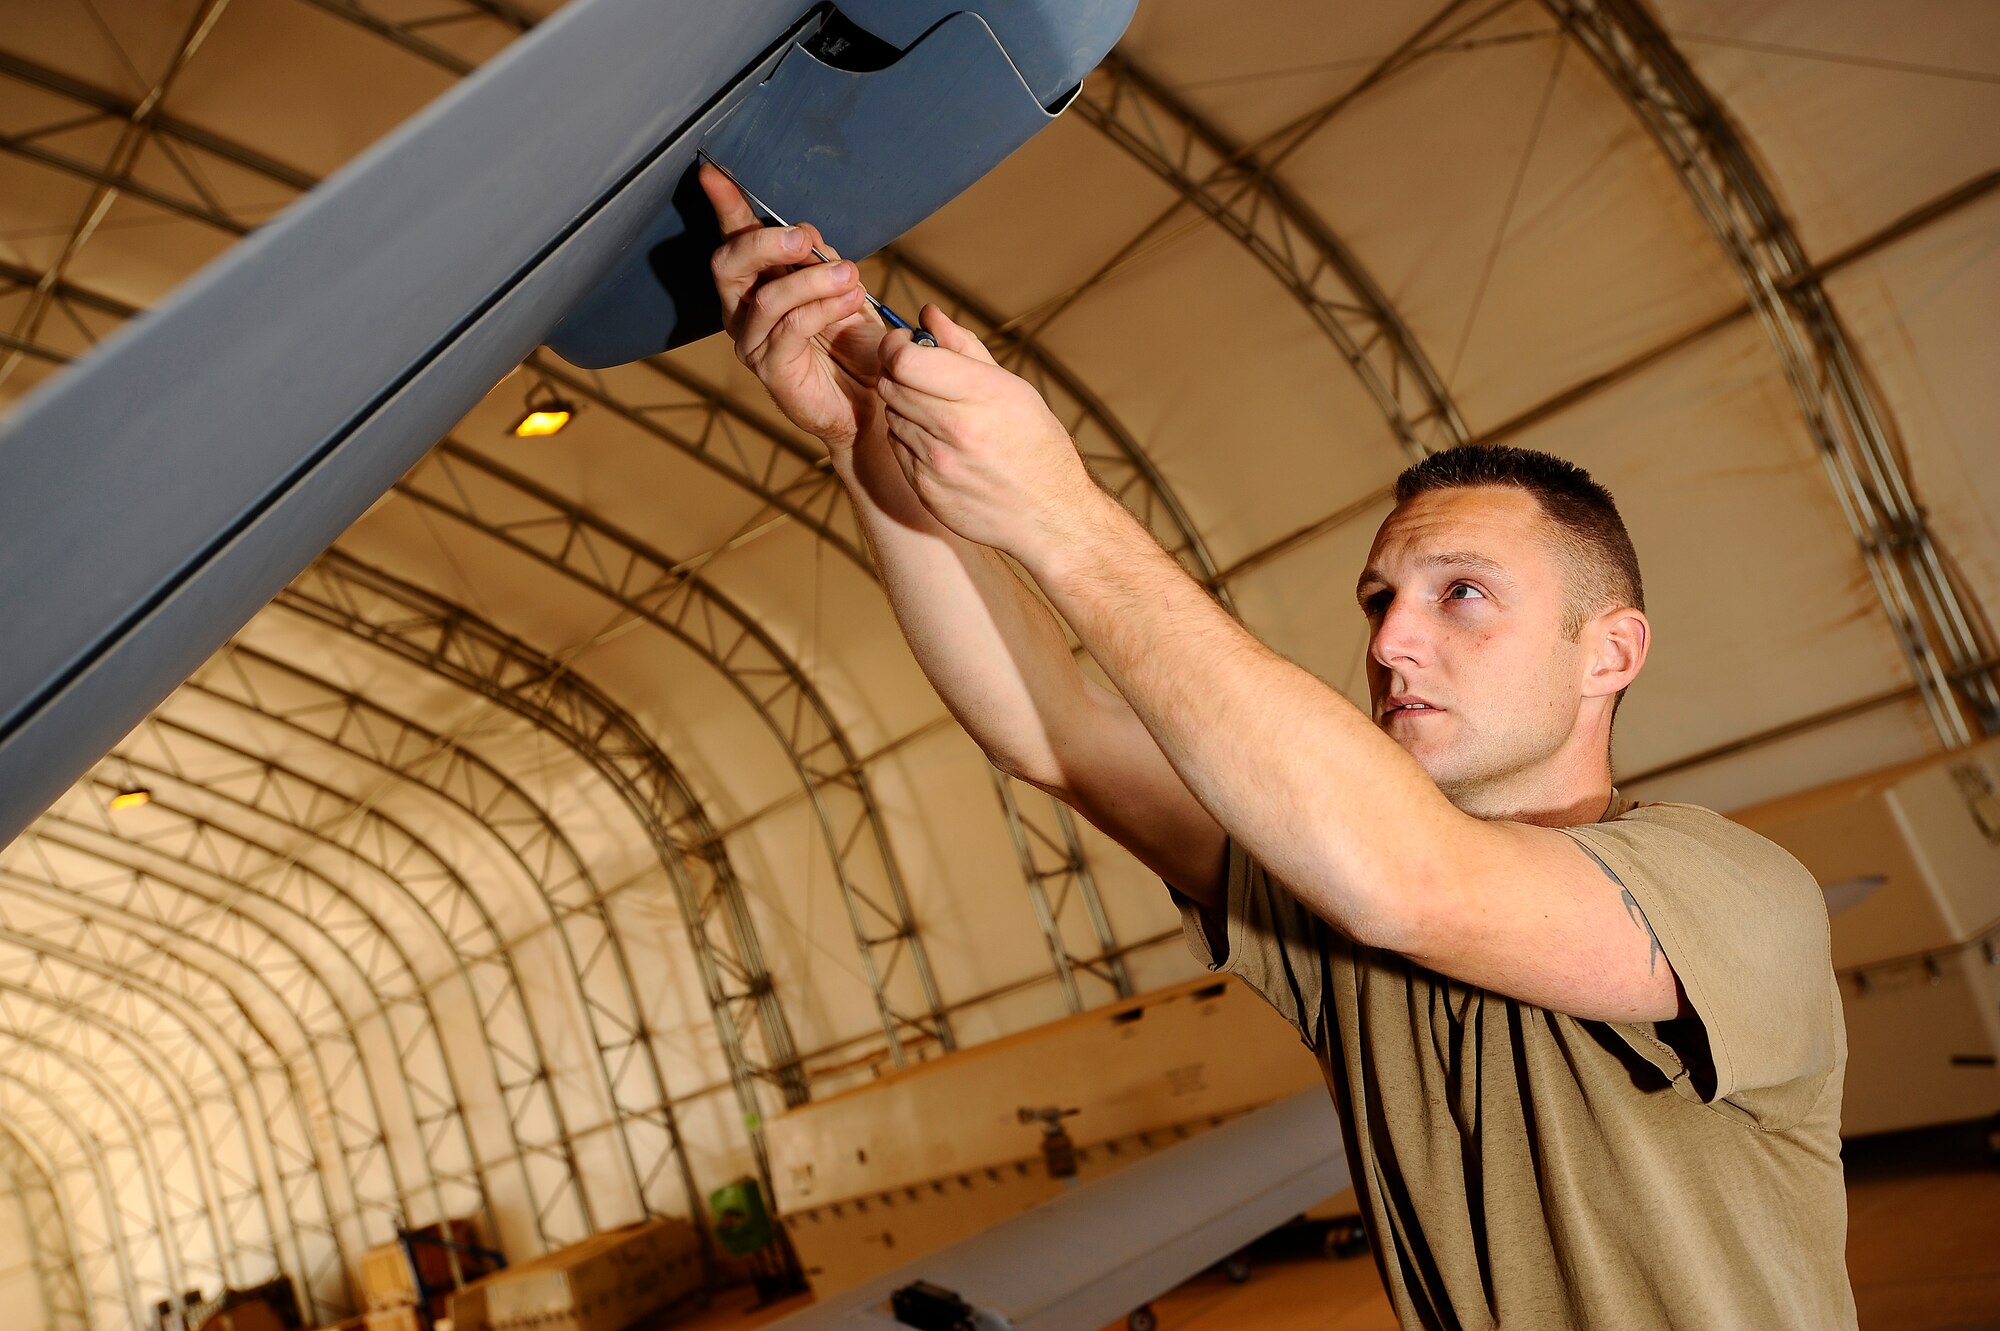 Royal Air Force Corporal Jon Watt attaches a servo actuator cover to the diagonal tail of an MQ-9 Reaper at Joint Base Balad, Iraq, Nov. 22. A coalition force of experts from the U.S. Air Force and Royal Air Force deployed here to man a new Reaper aircraft maintenance unit. The unit is attached to the 46th Expeditionary Reconnaissance and Attack Squadron and assumed maintenance duties from General Atomics, which produces the Reaper for these services. Watt, a Reaper avionics specialist assigned to the 332nd Expeditionary Aircraft Maintenance Squadron, is deployed from Creech Air Force Base, Nev. His hometown is Plymouth, England. (U.S. Air Force photo/Airman 1st Class Jason Epley)(Released)